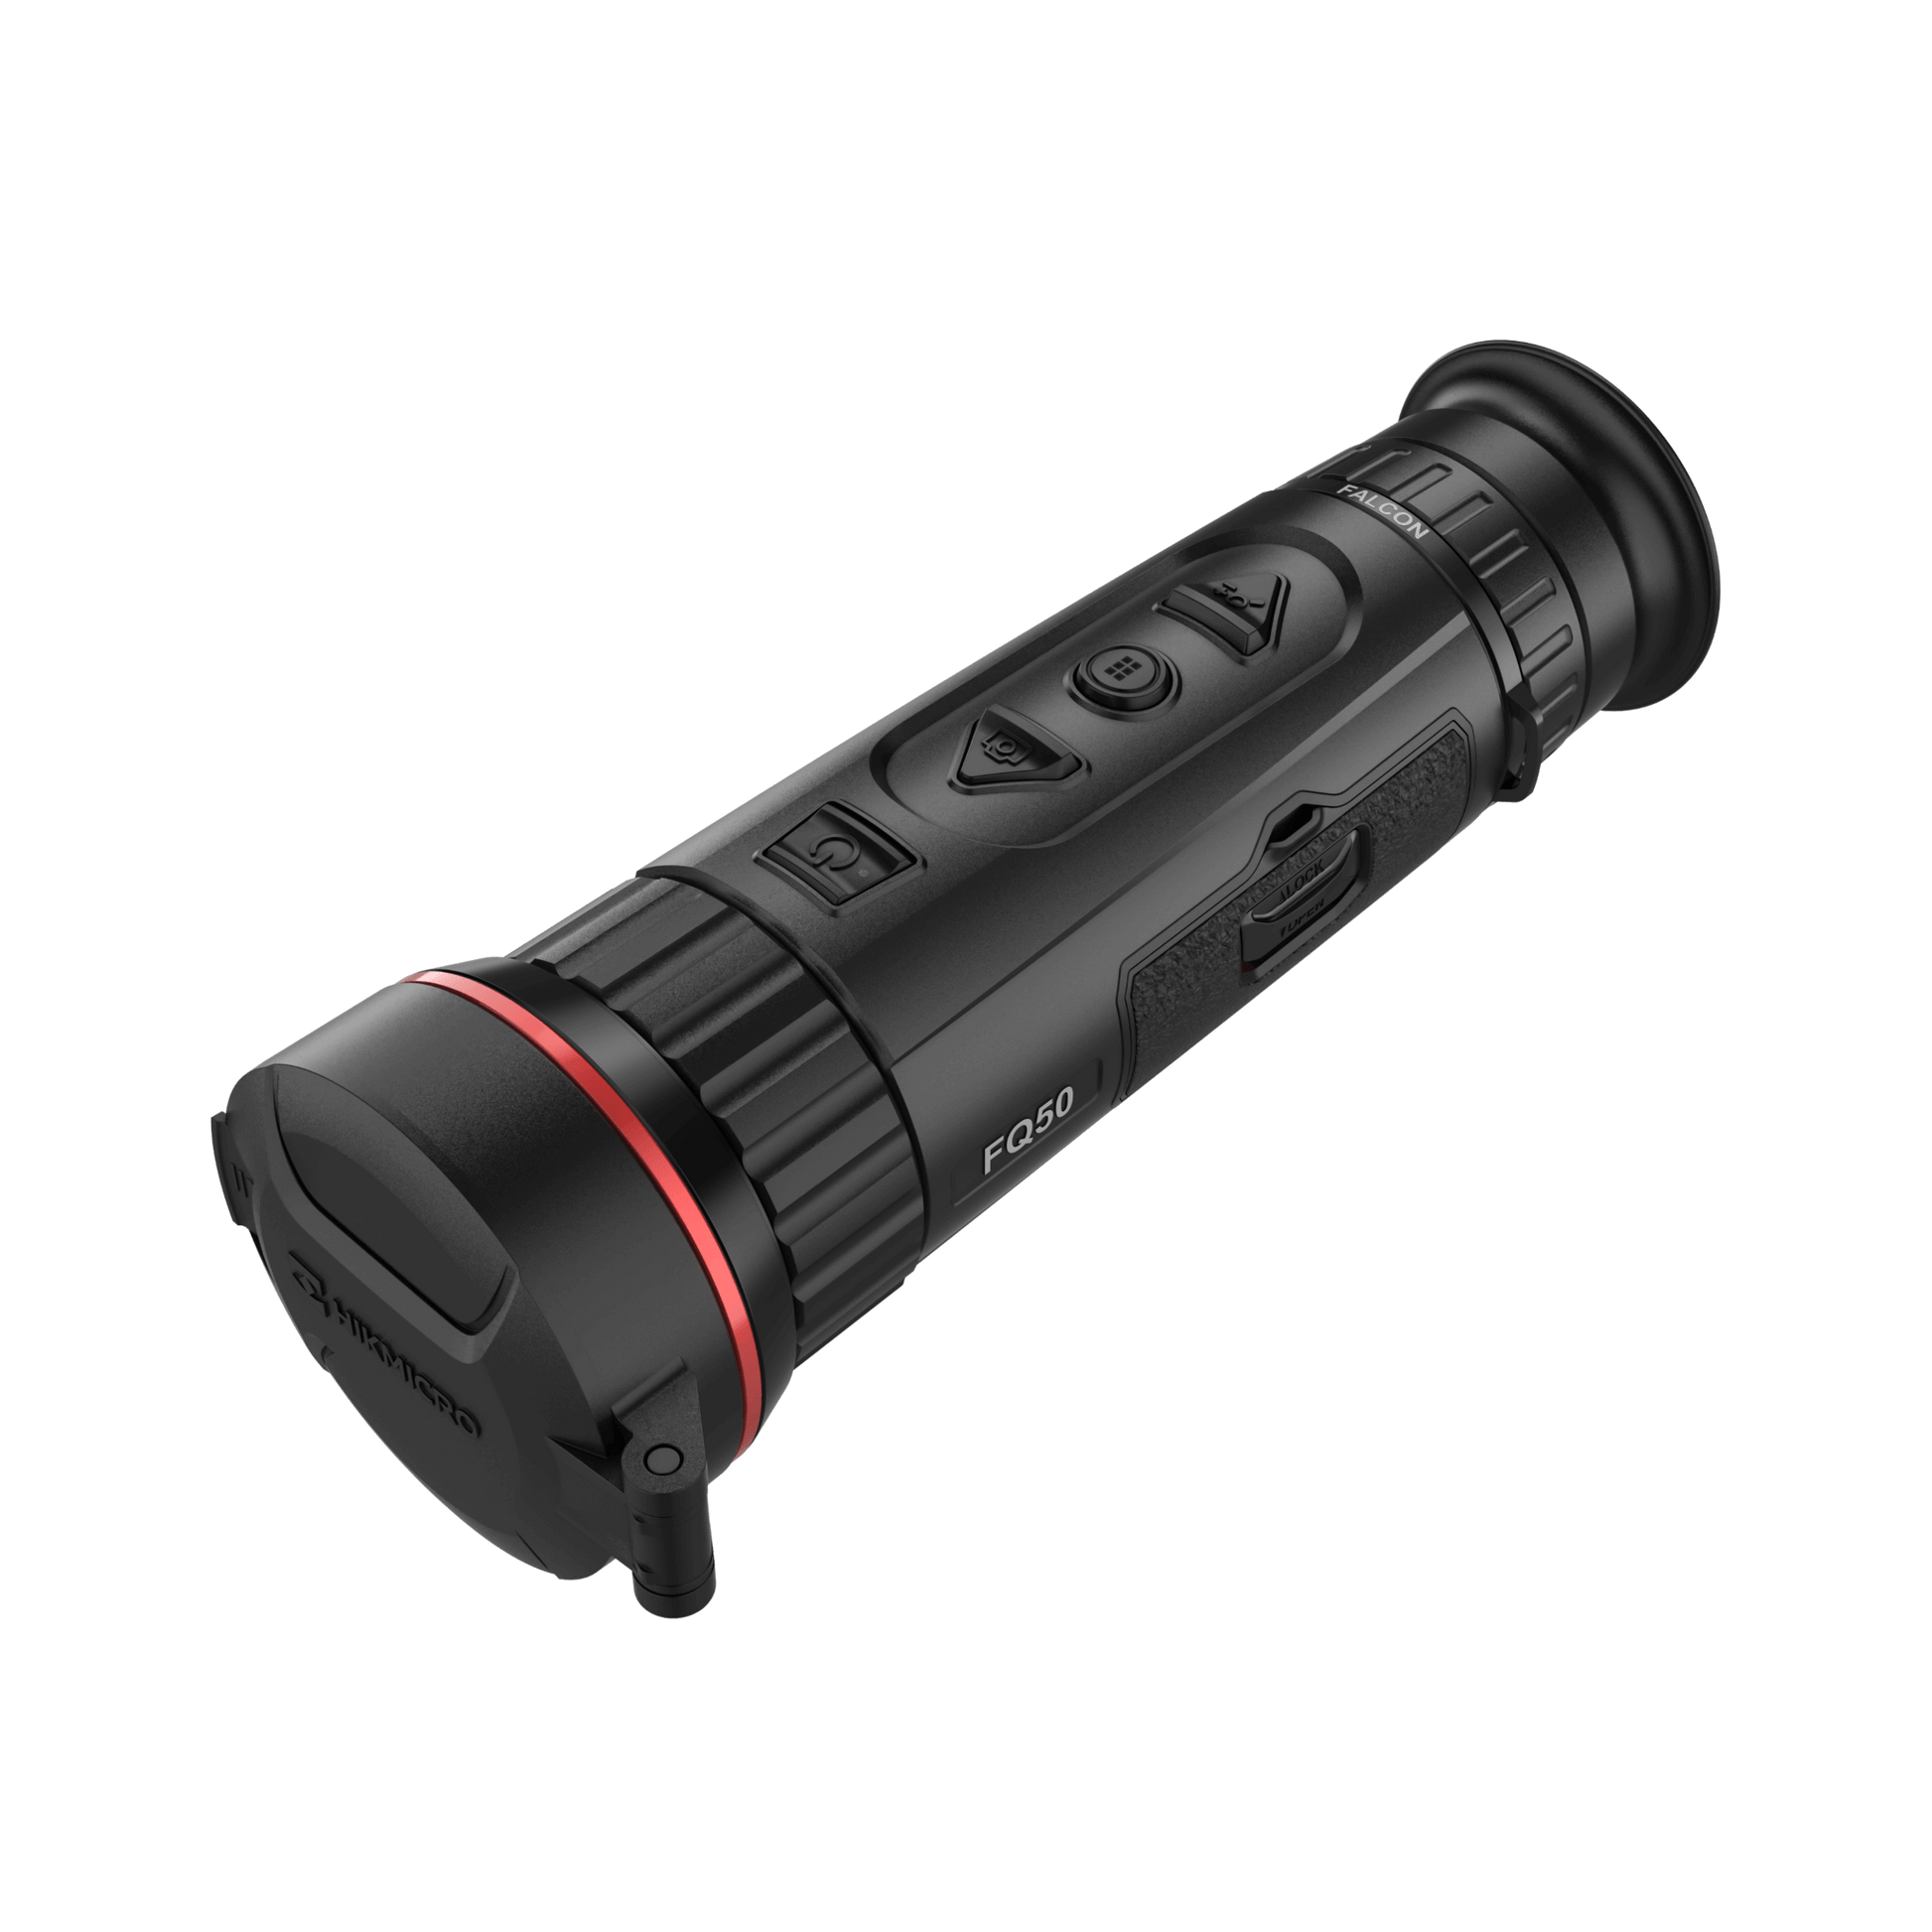 HikMicro Thermal Imaging Monocular for Sale - HikMicro Falcon Series FQ50 - HM-TS46-35XG_W-FQ50 -  Front Left from above